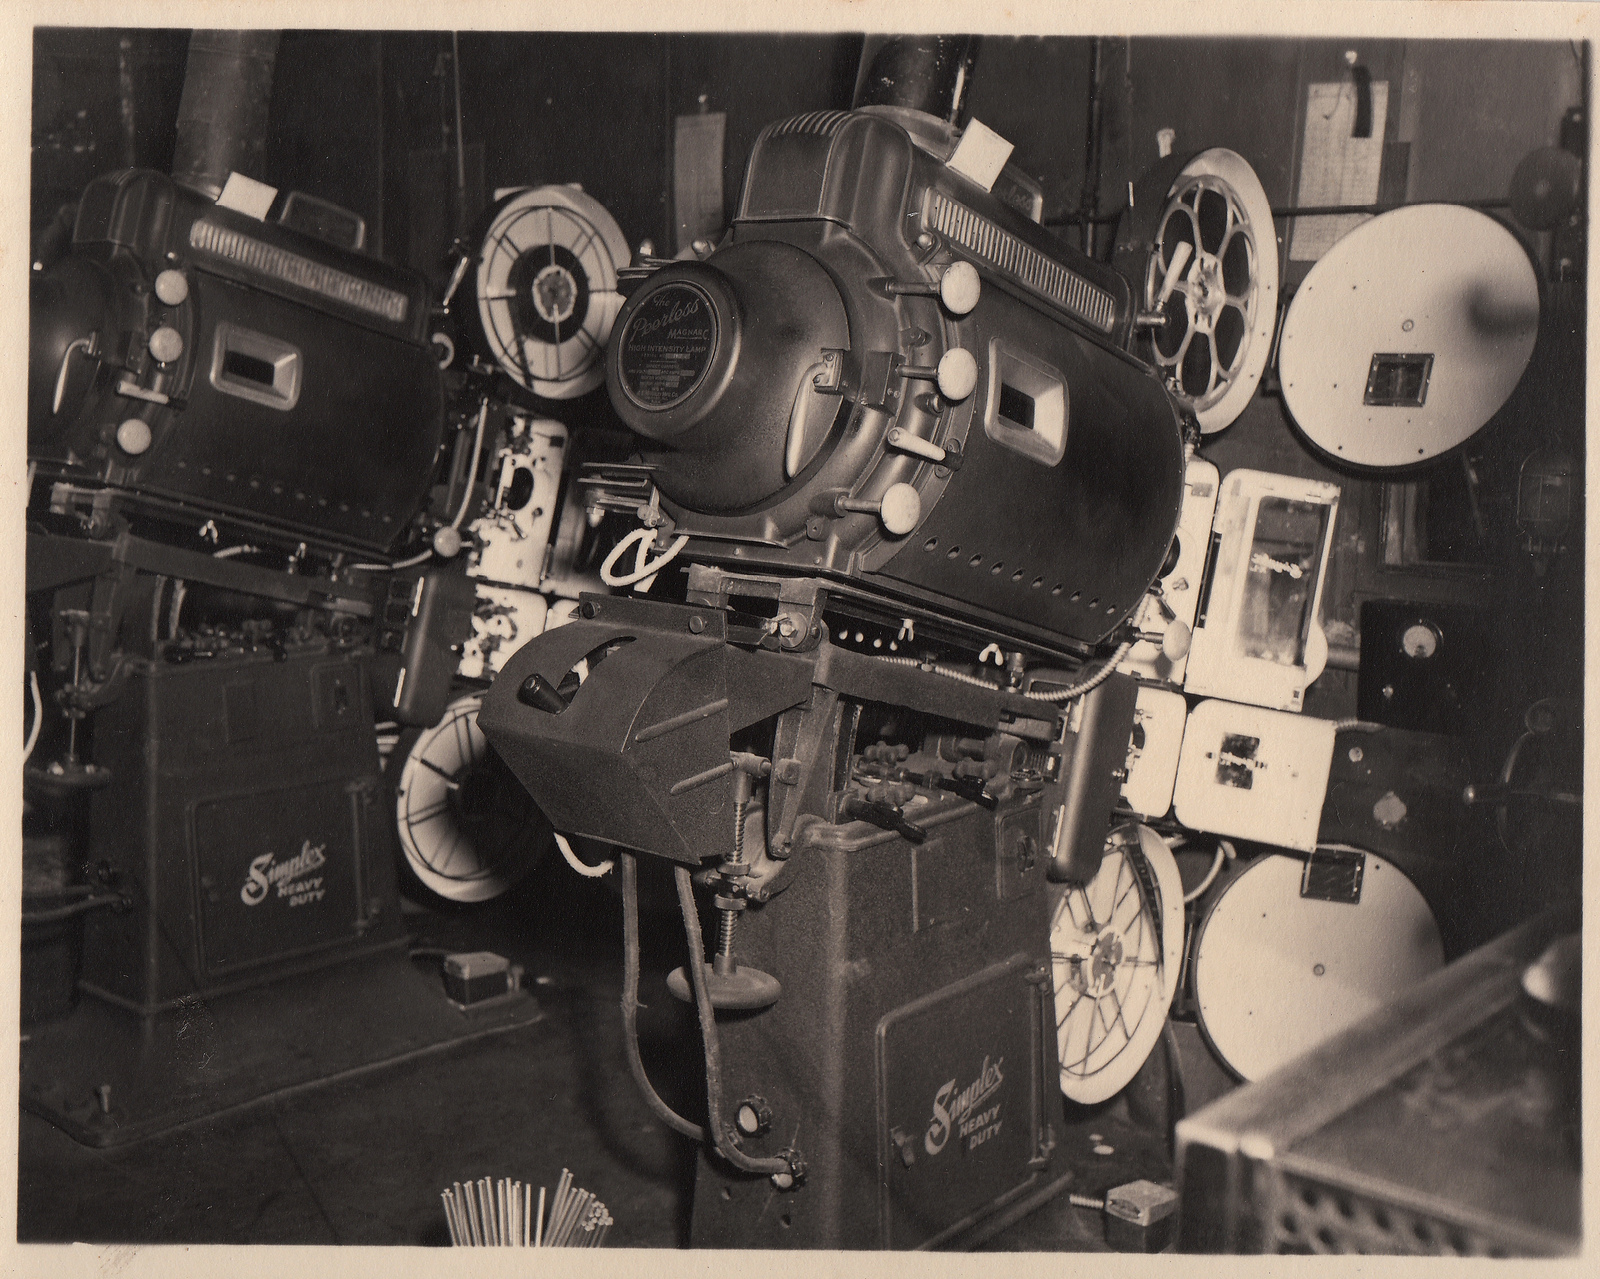 Projection-Booth-State-Theatre-Easton-Pennsylvania.jpg